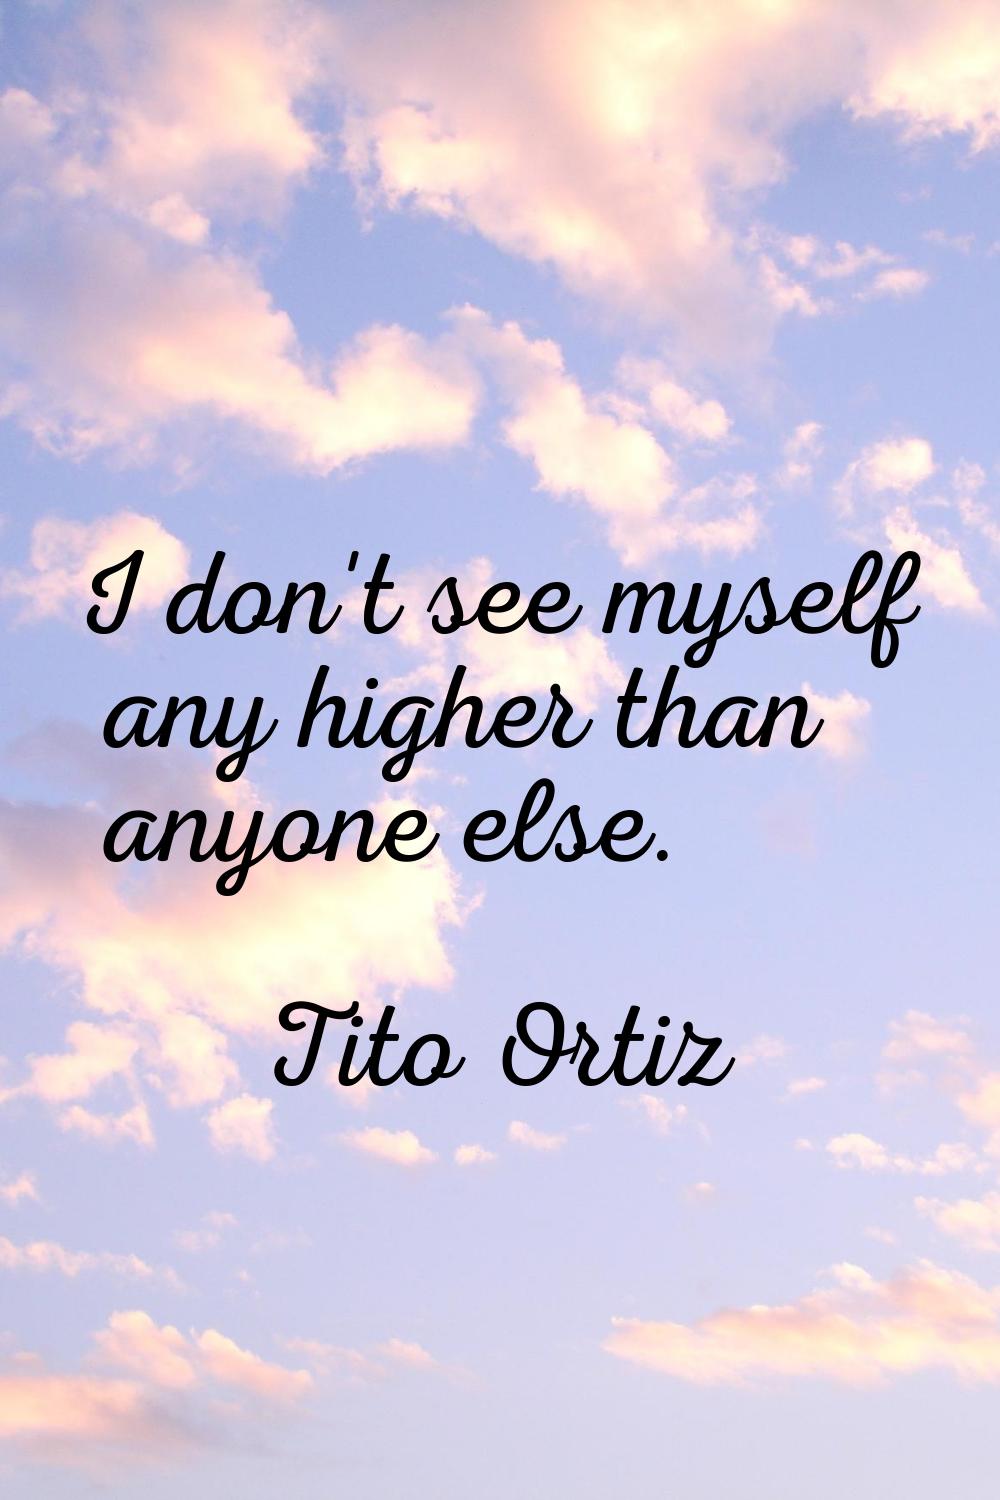 I don't see myself any higher than anyone else.